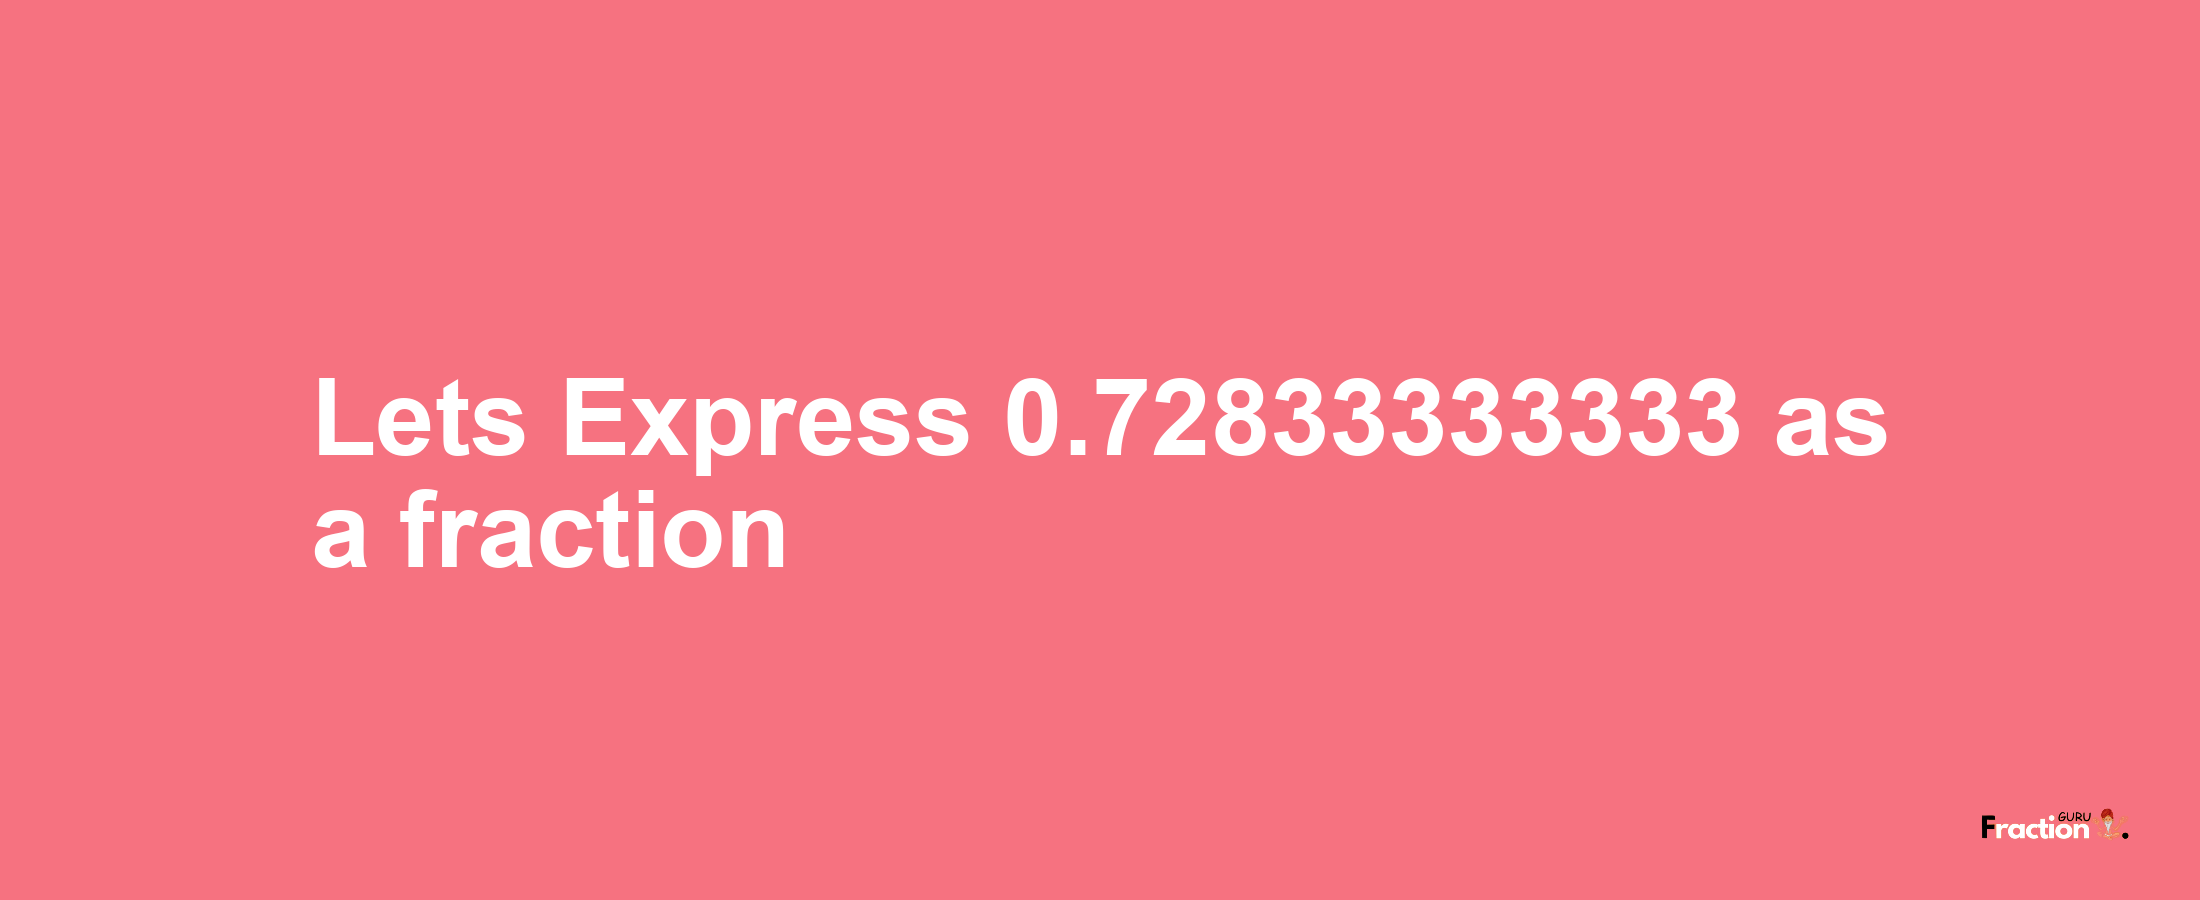 Lets Express 0.72833333333 as afraction